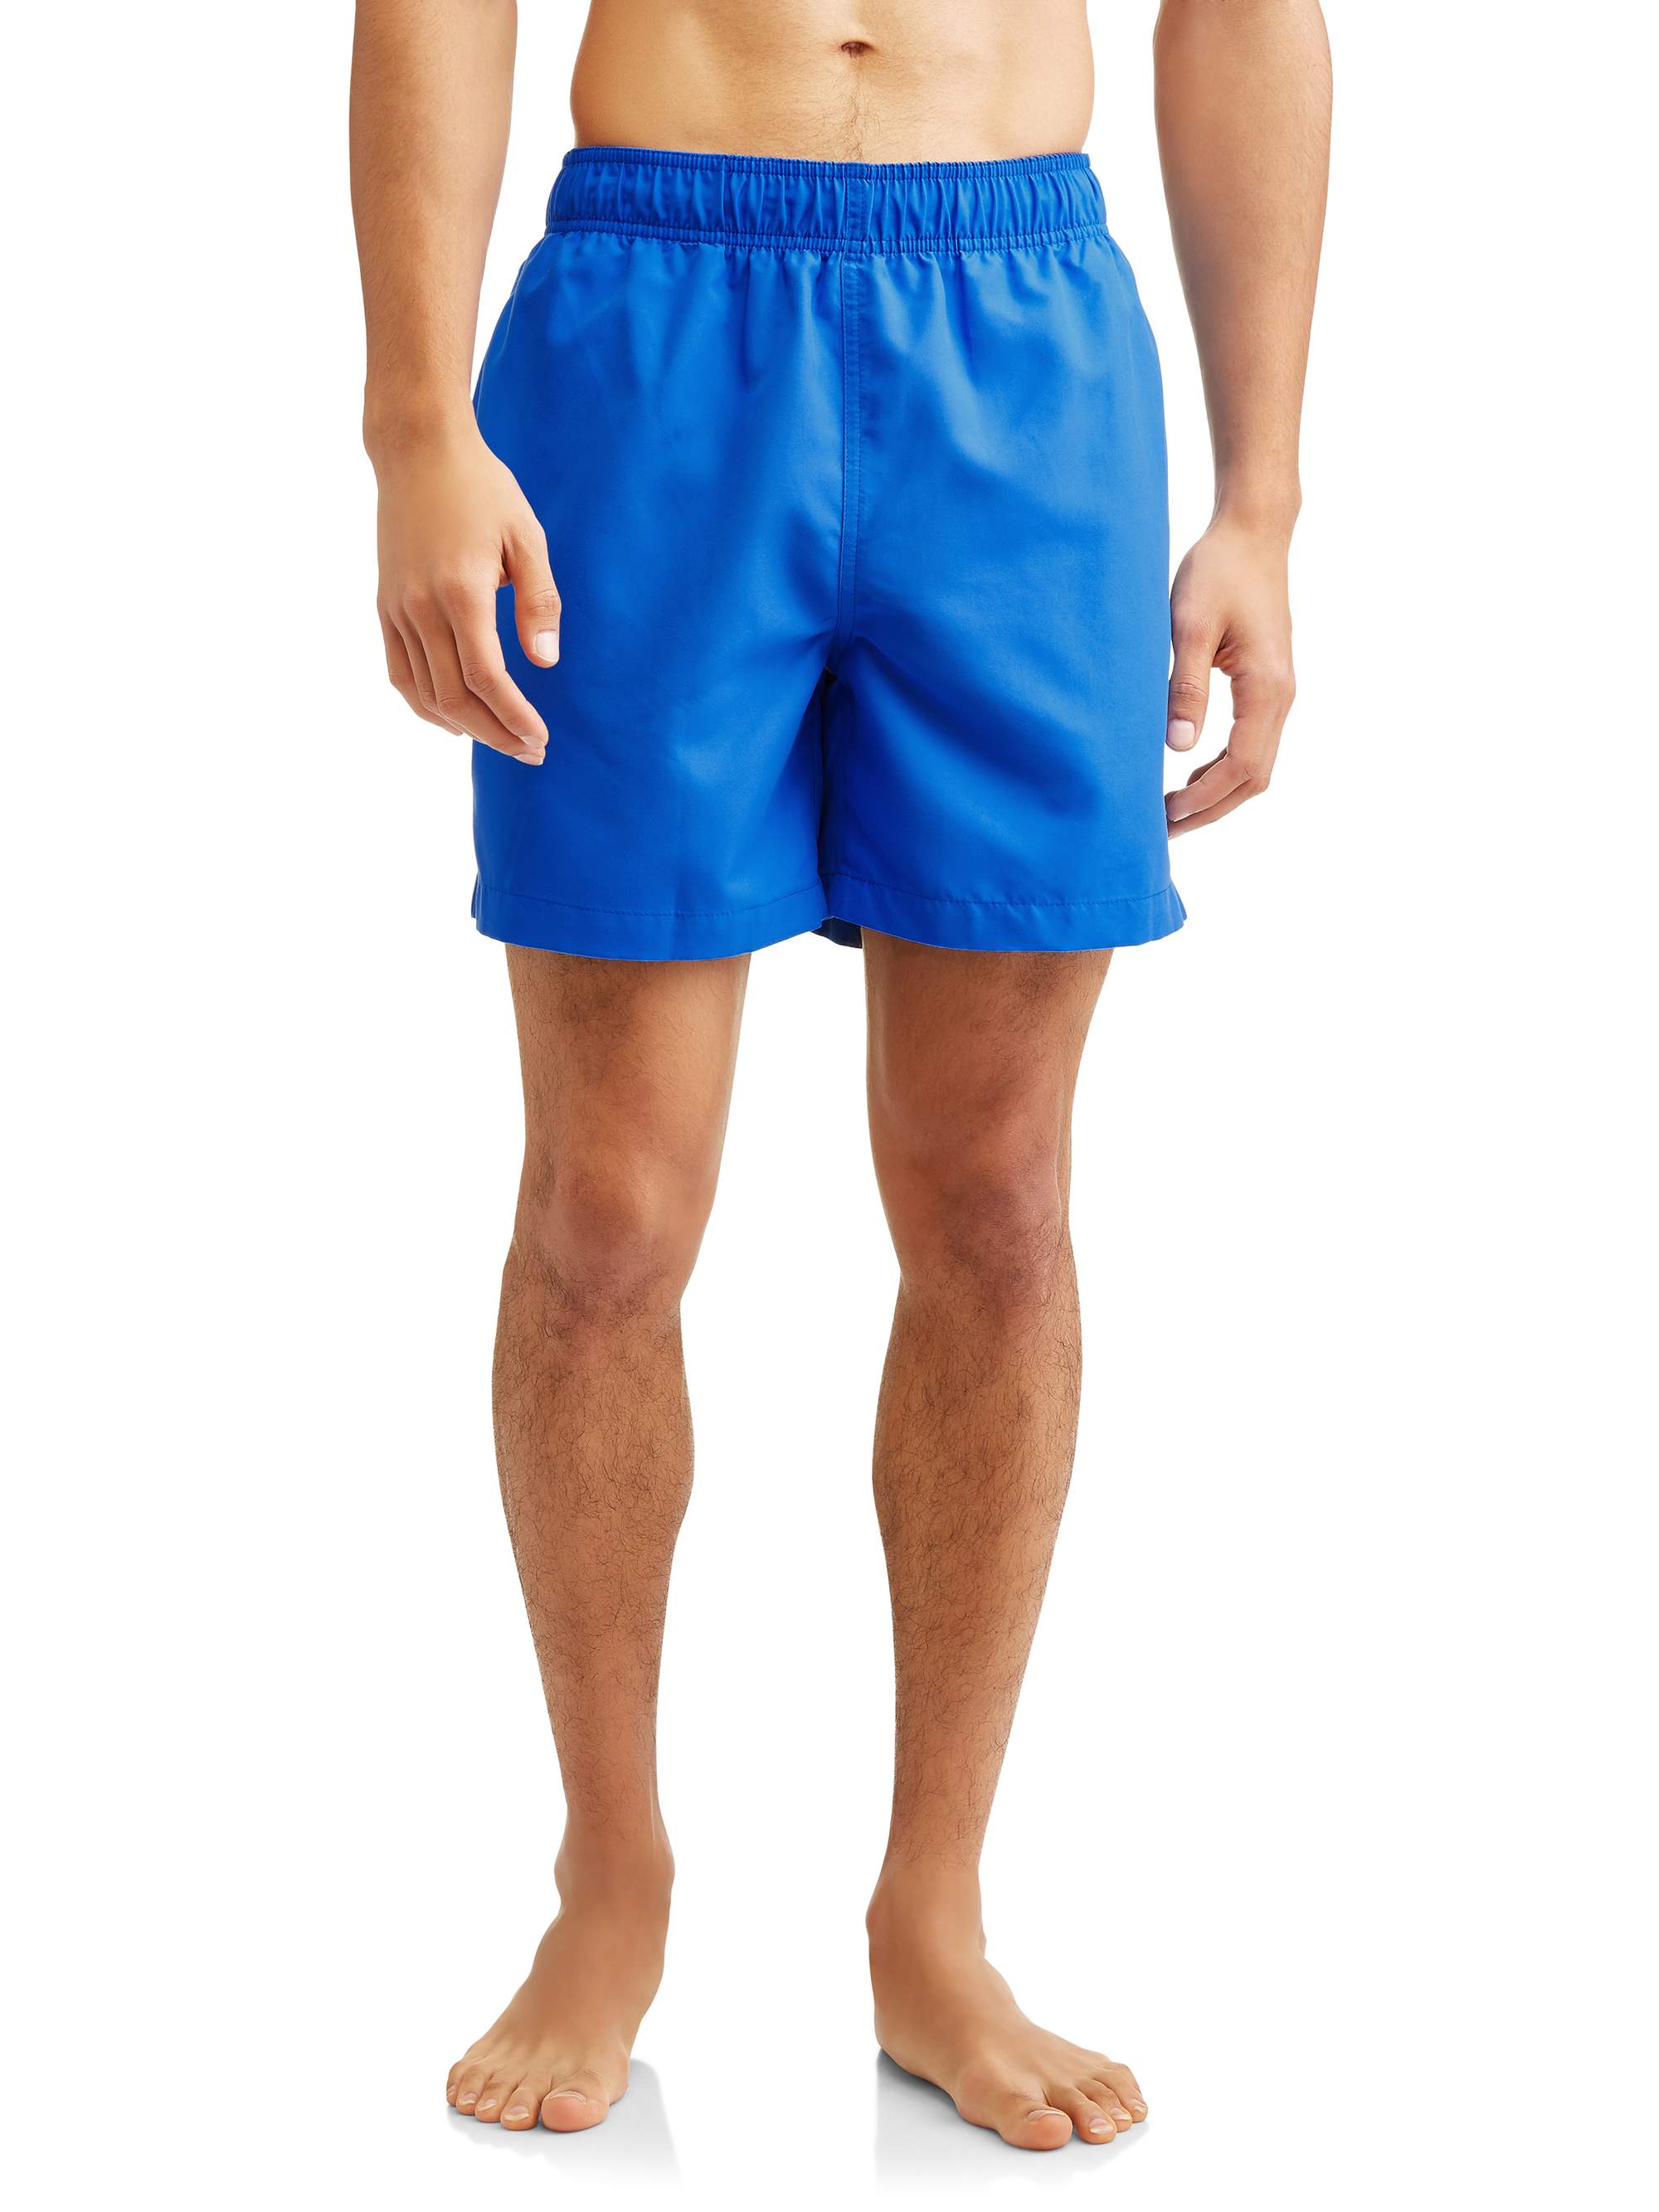 Men's And Men's Big Basic Swim Trunks, up to Size 5Xl - image 1 of 3